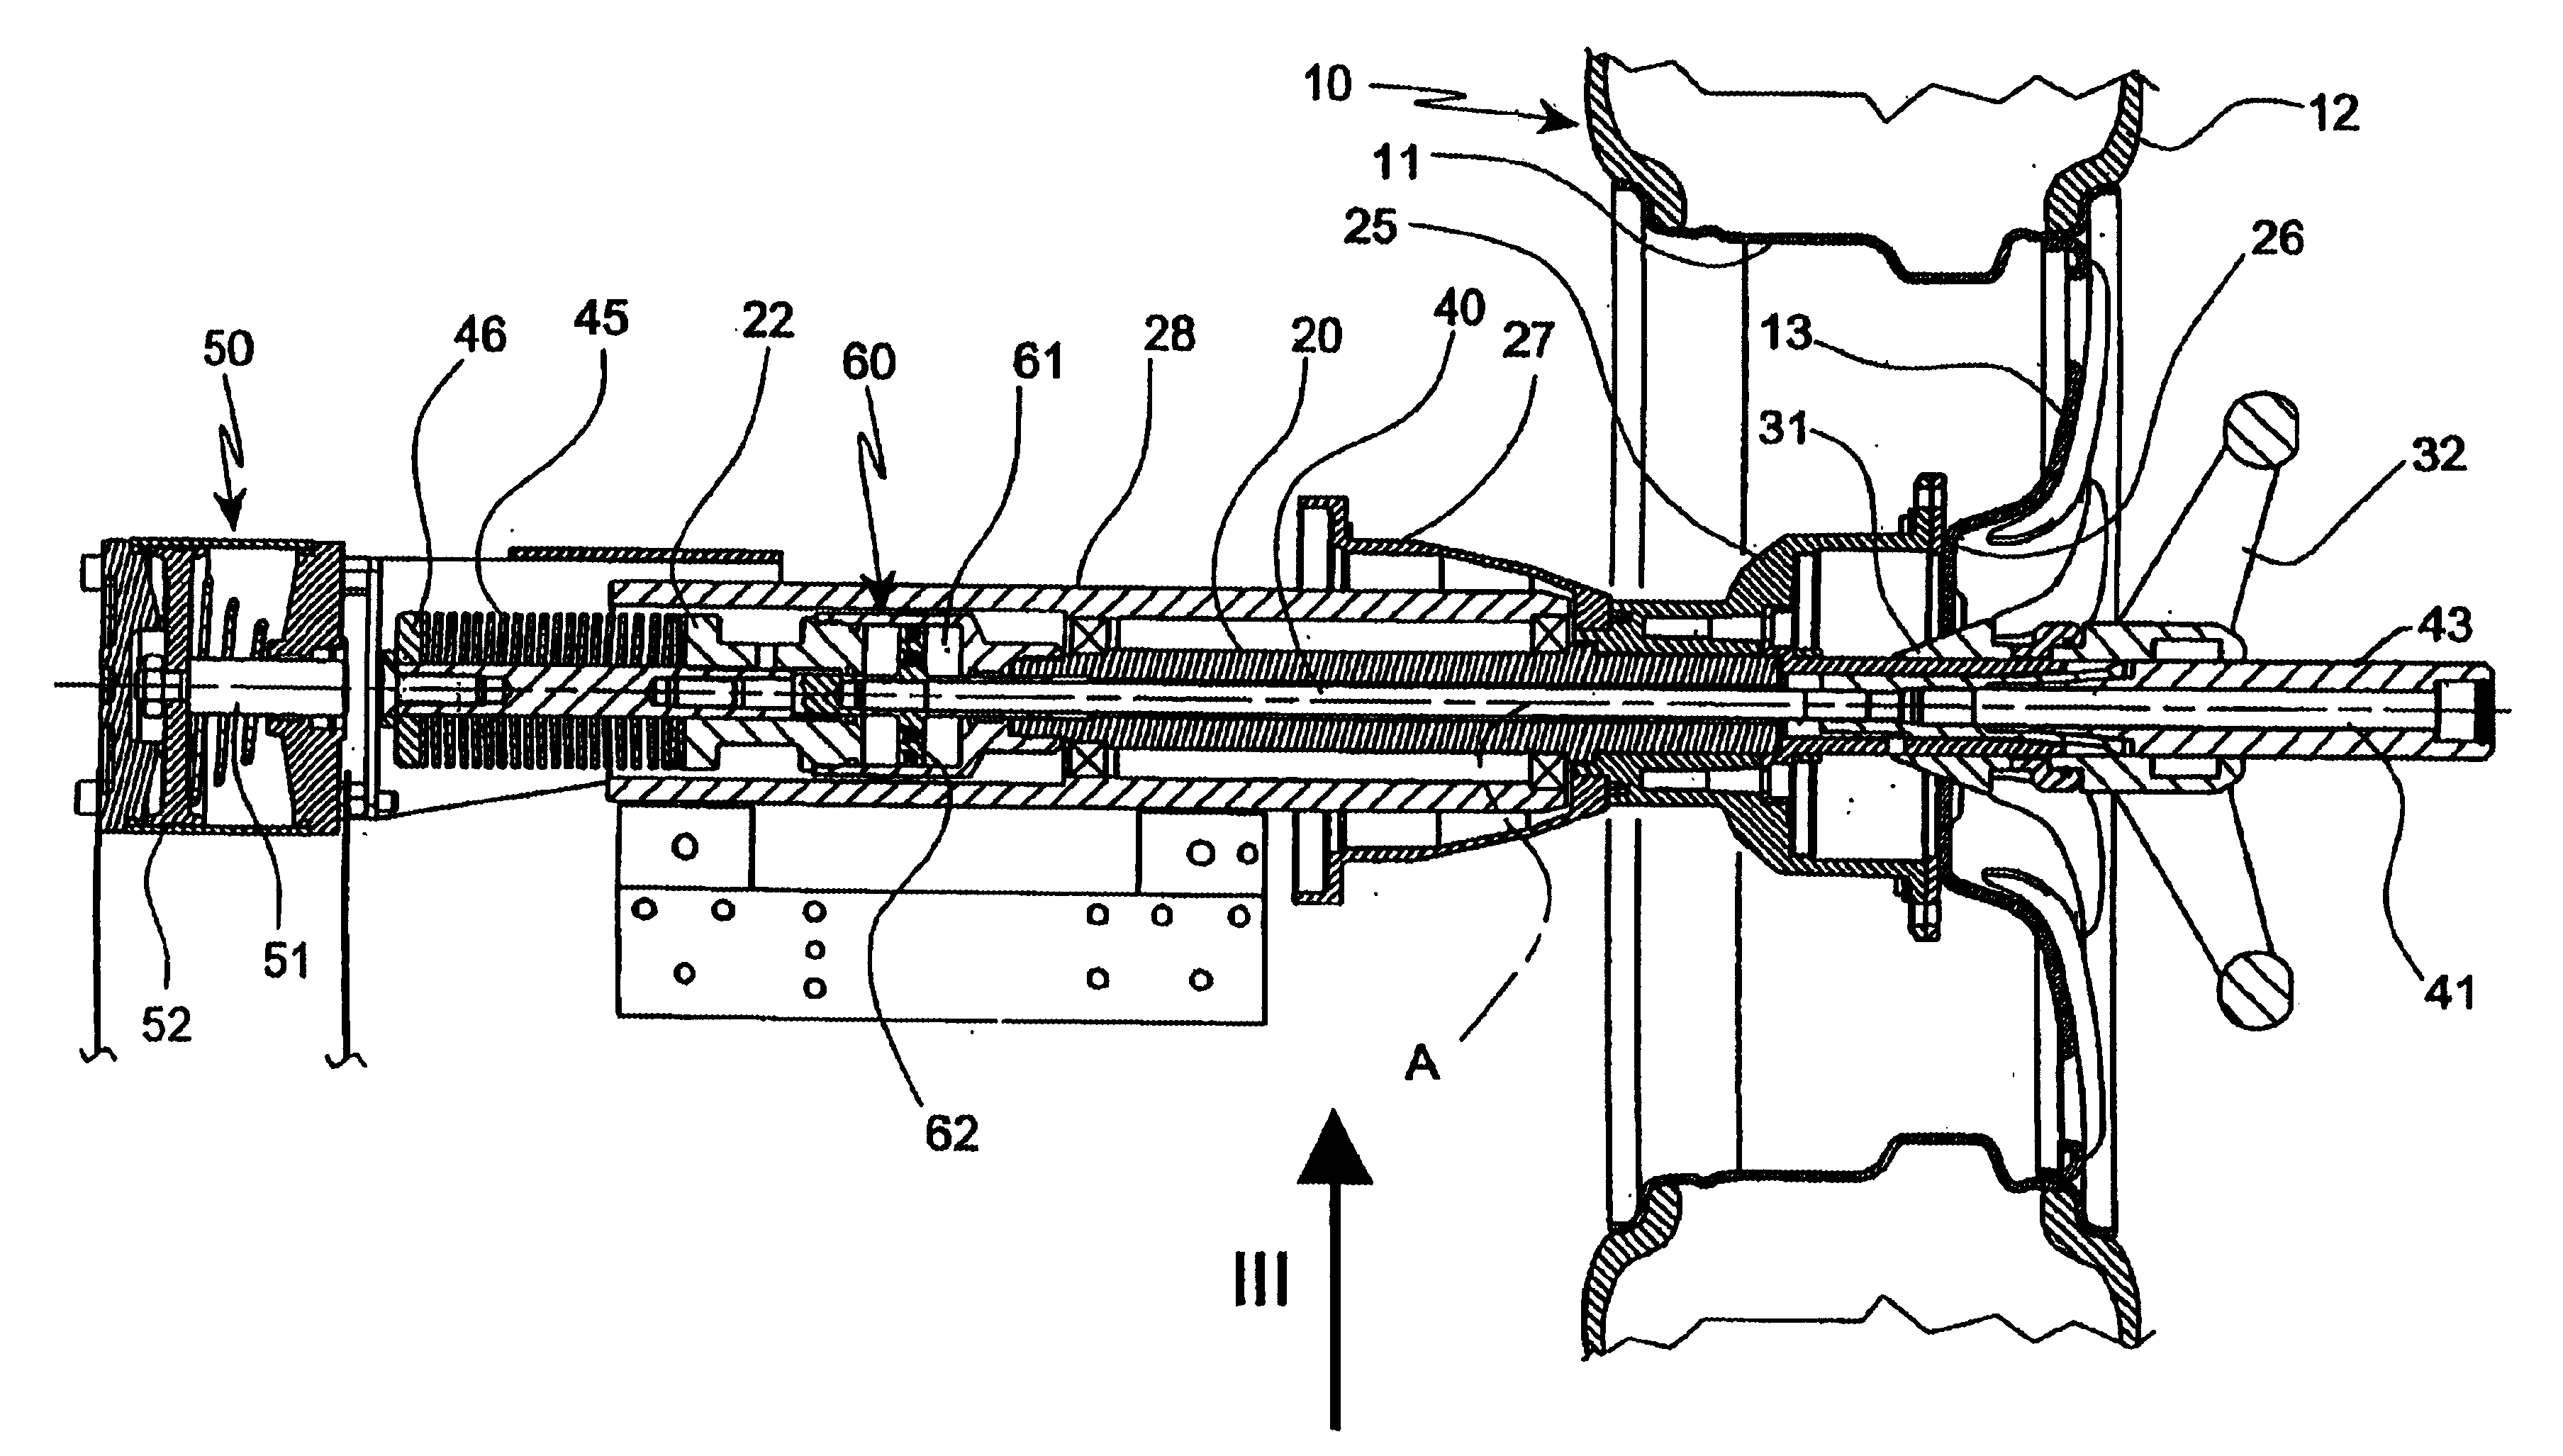 Locking and drive unit for a rotating body, in particular for motor vehicle wheels in a balancing machine